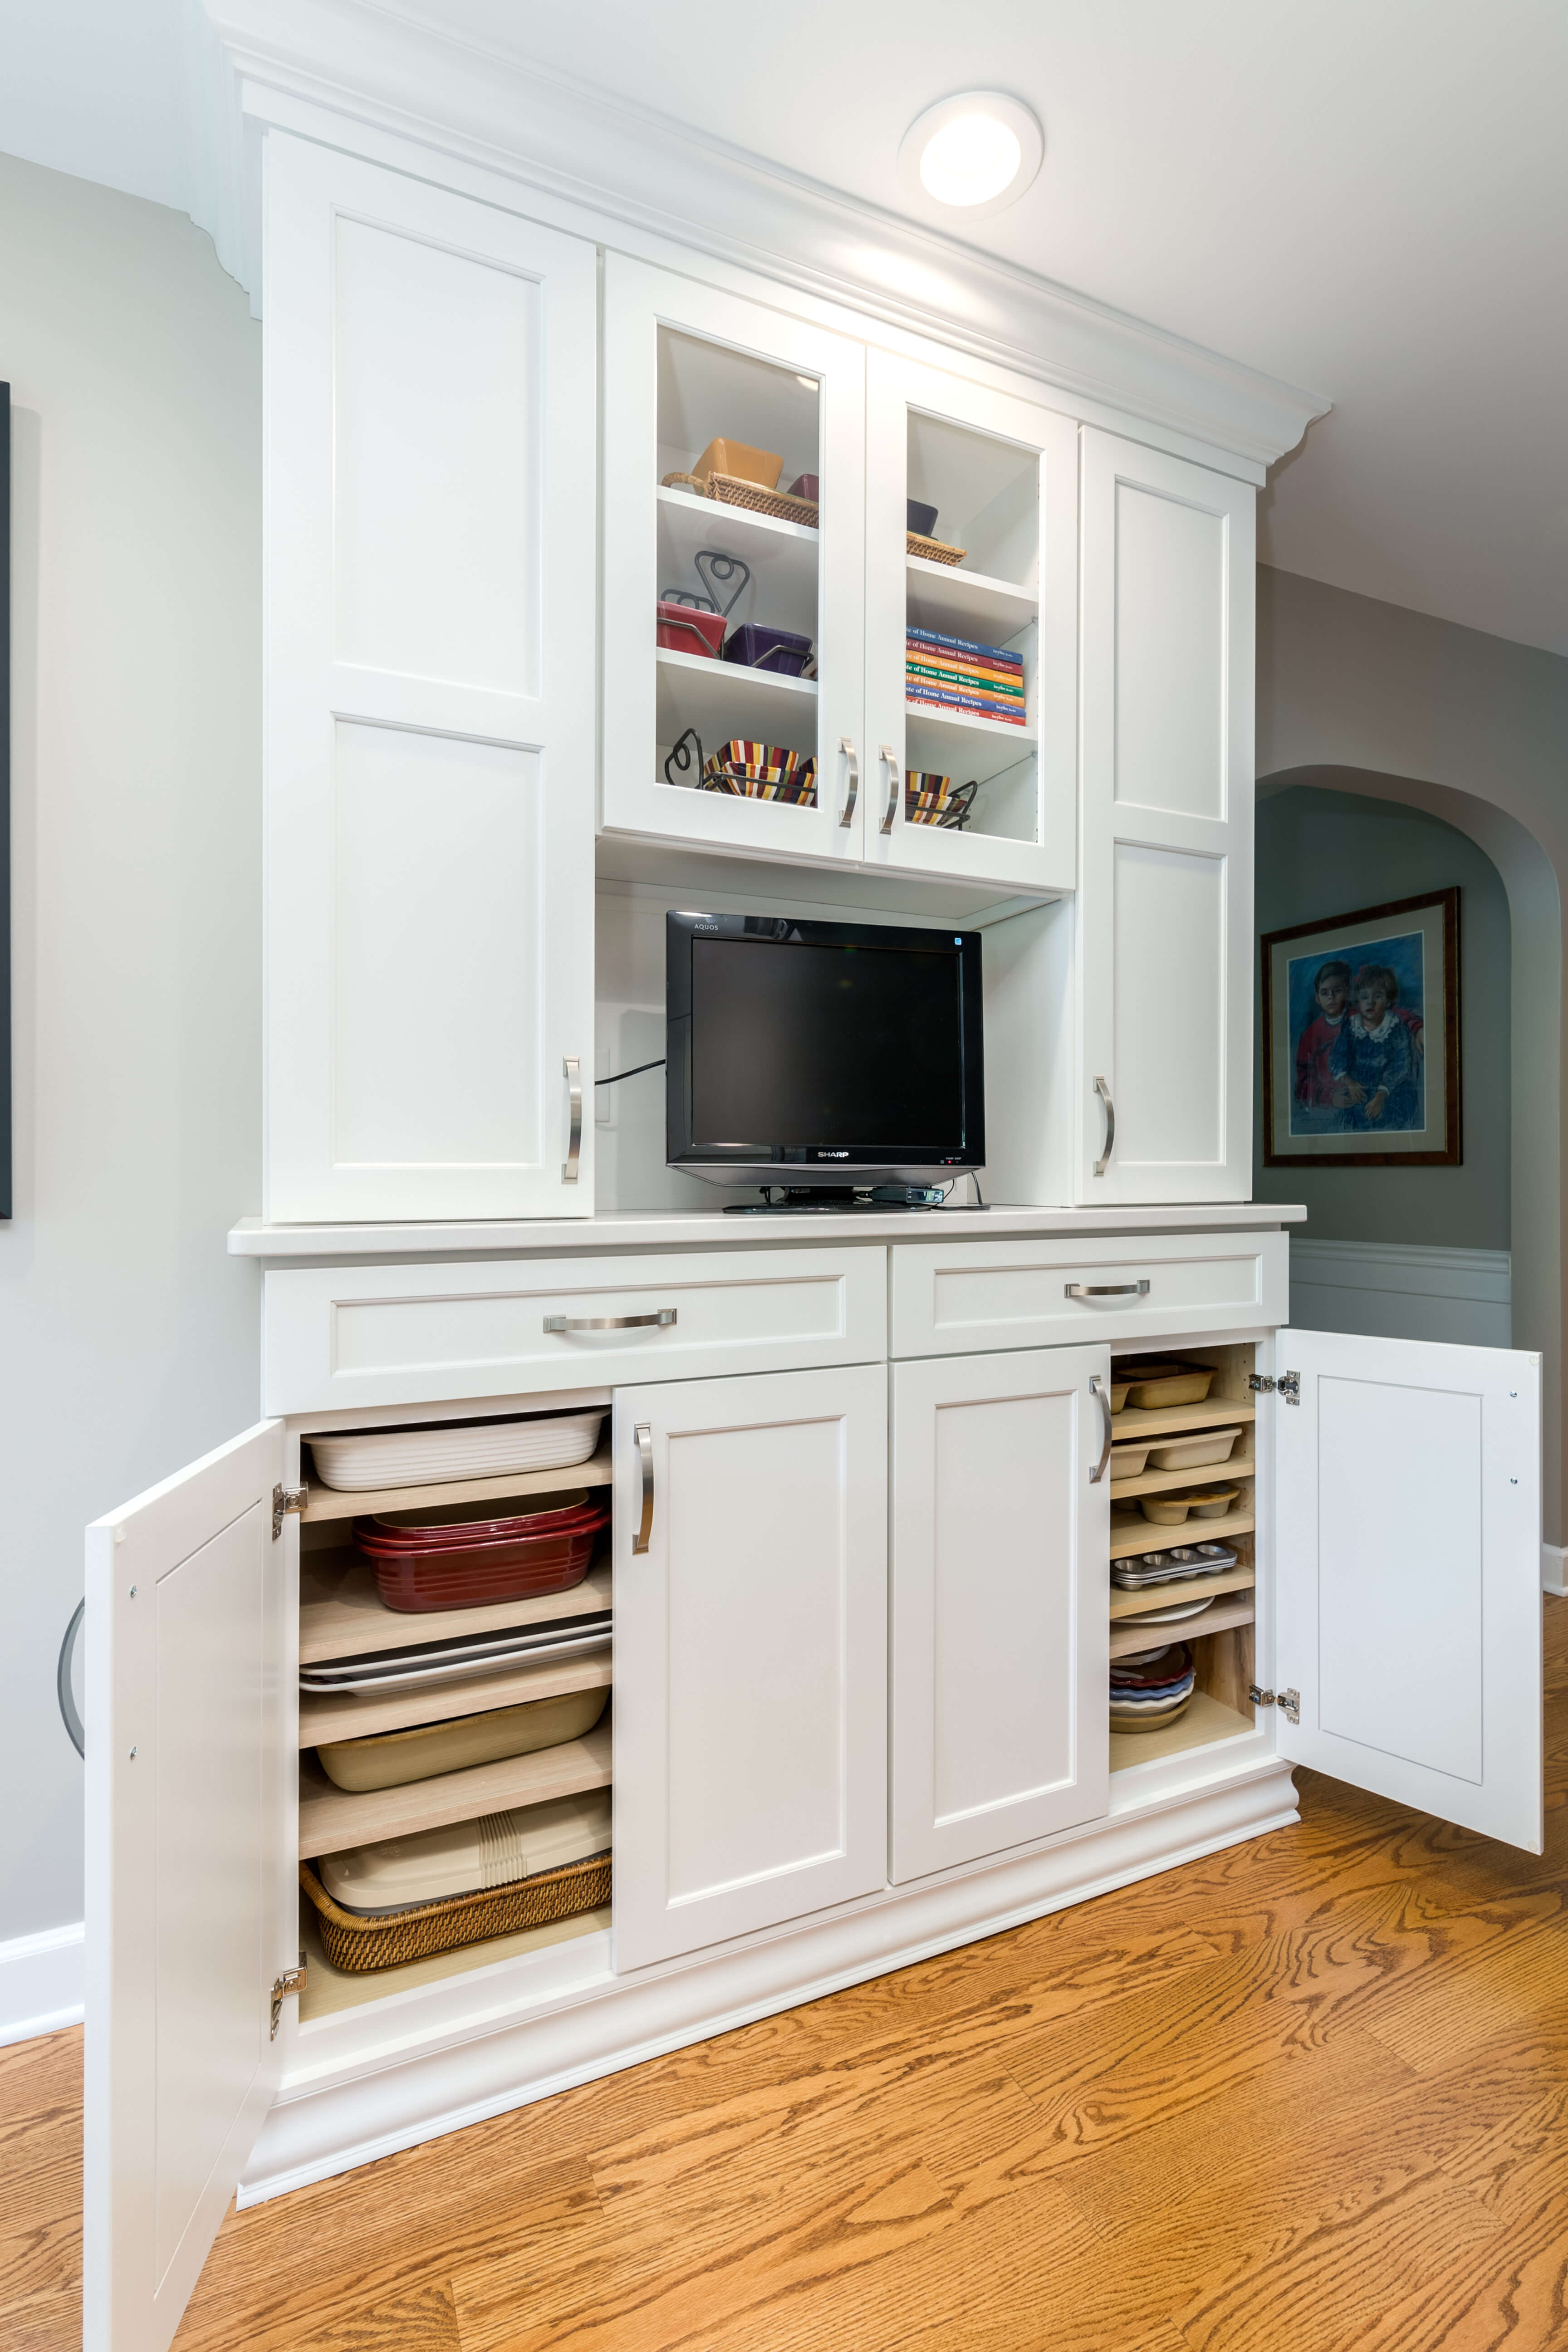 Drawer Spice Rack - Dura Supreme Cabinetry